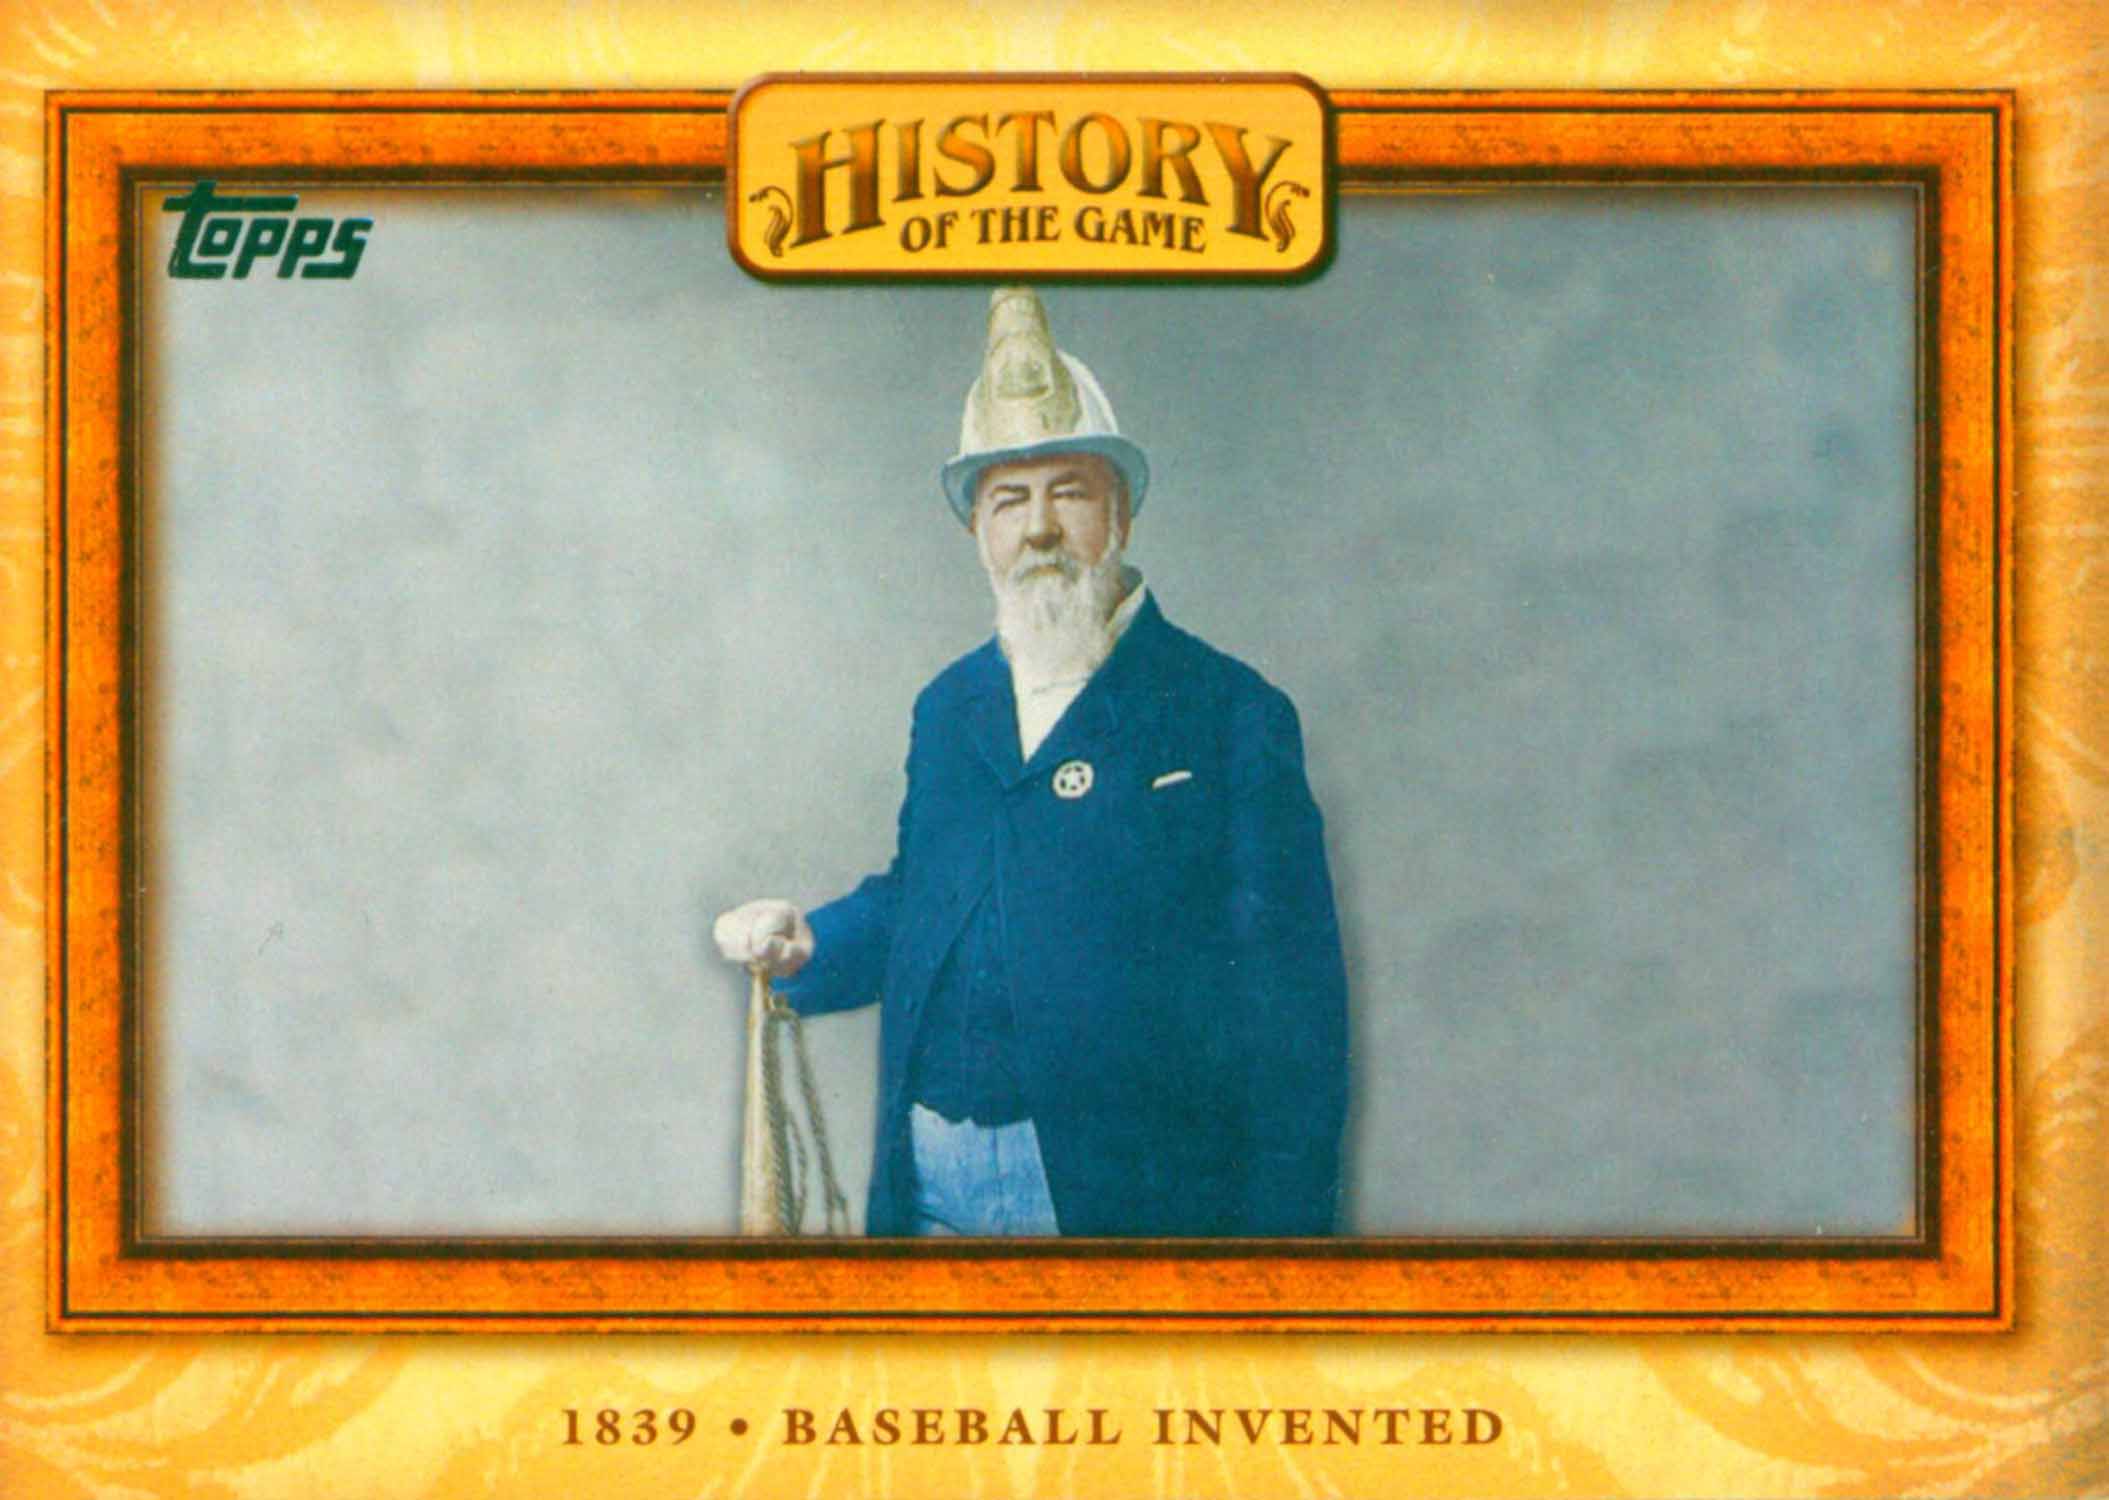 2010 Topps History of the Game